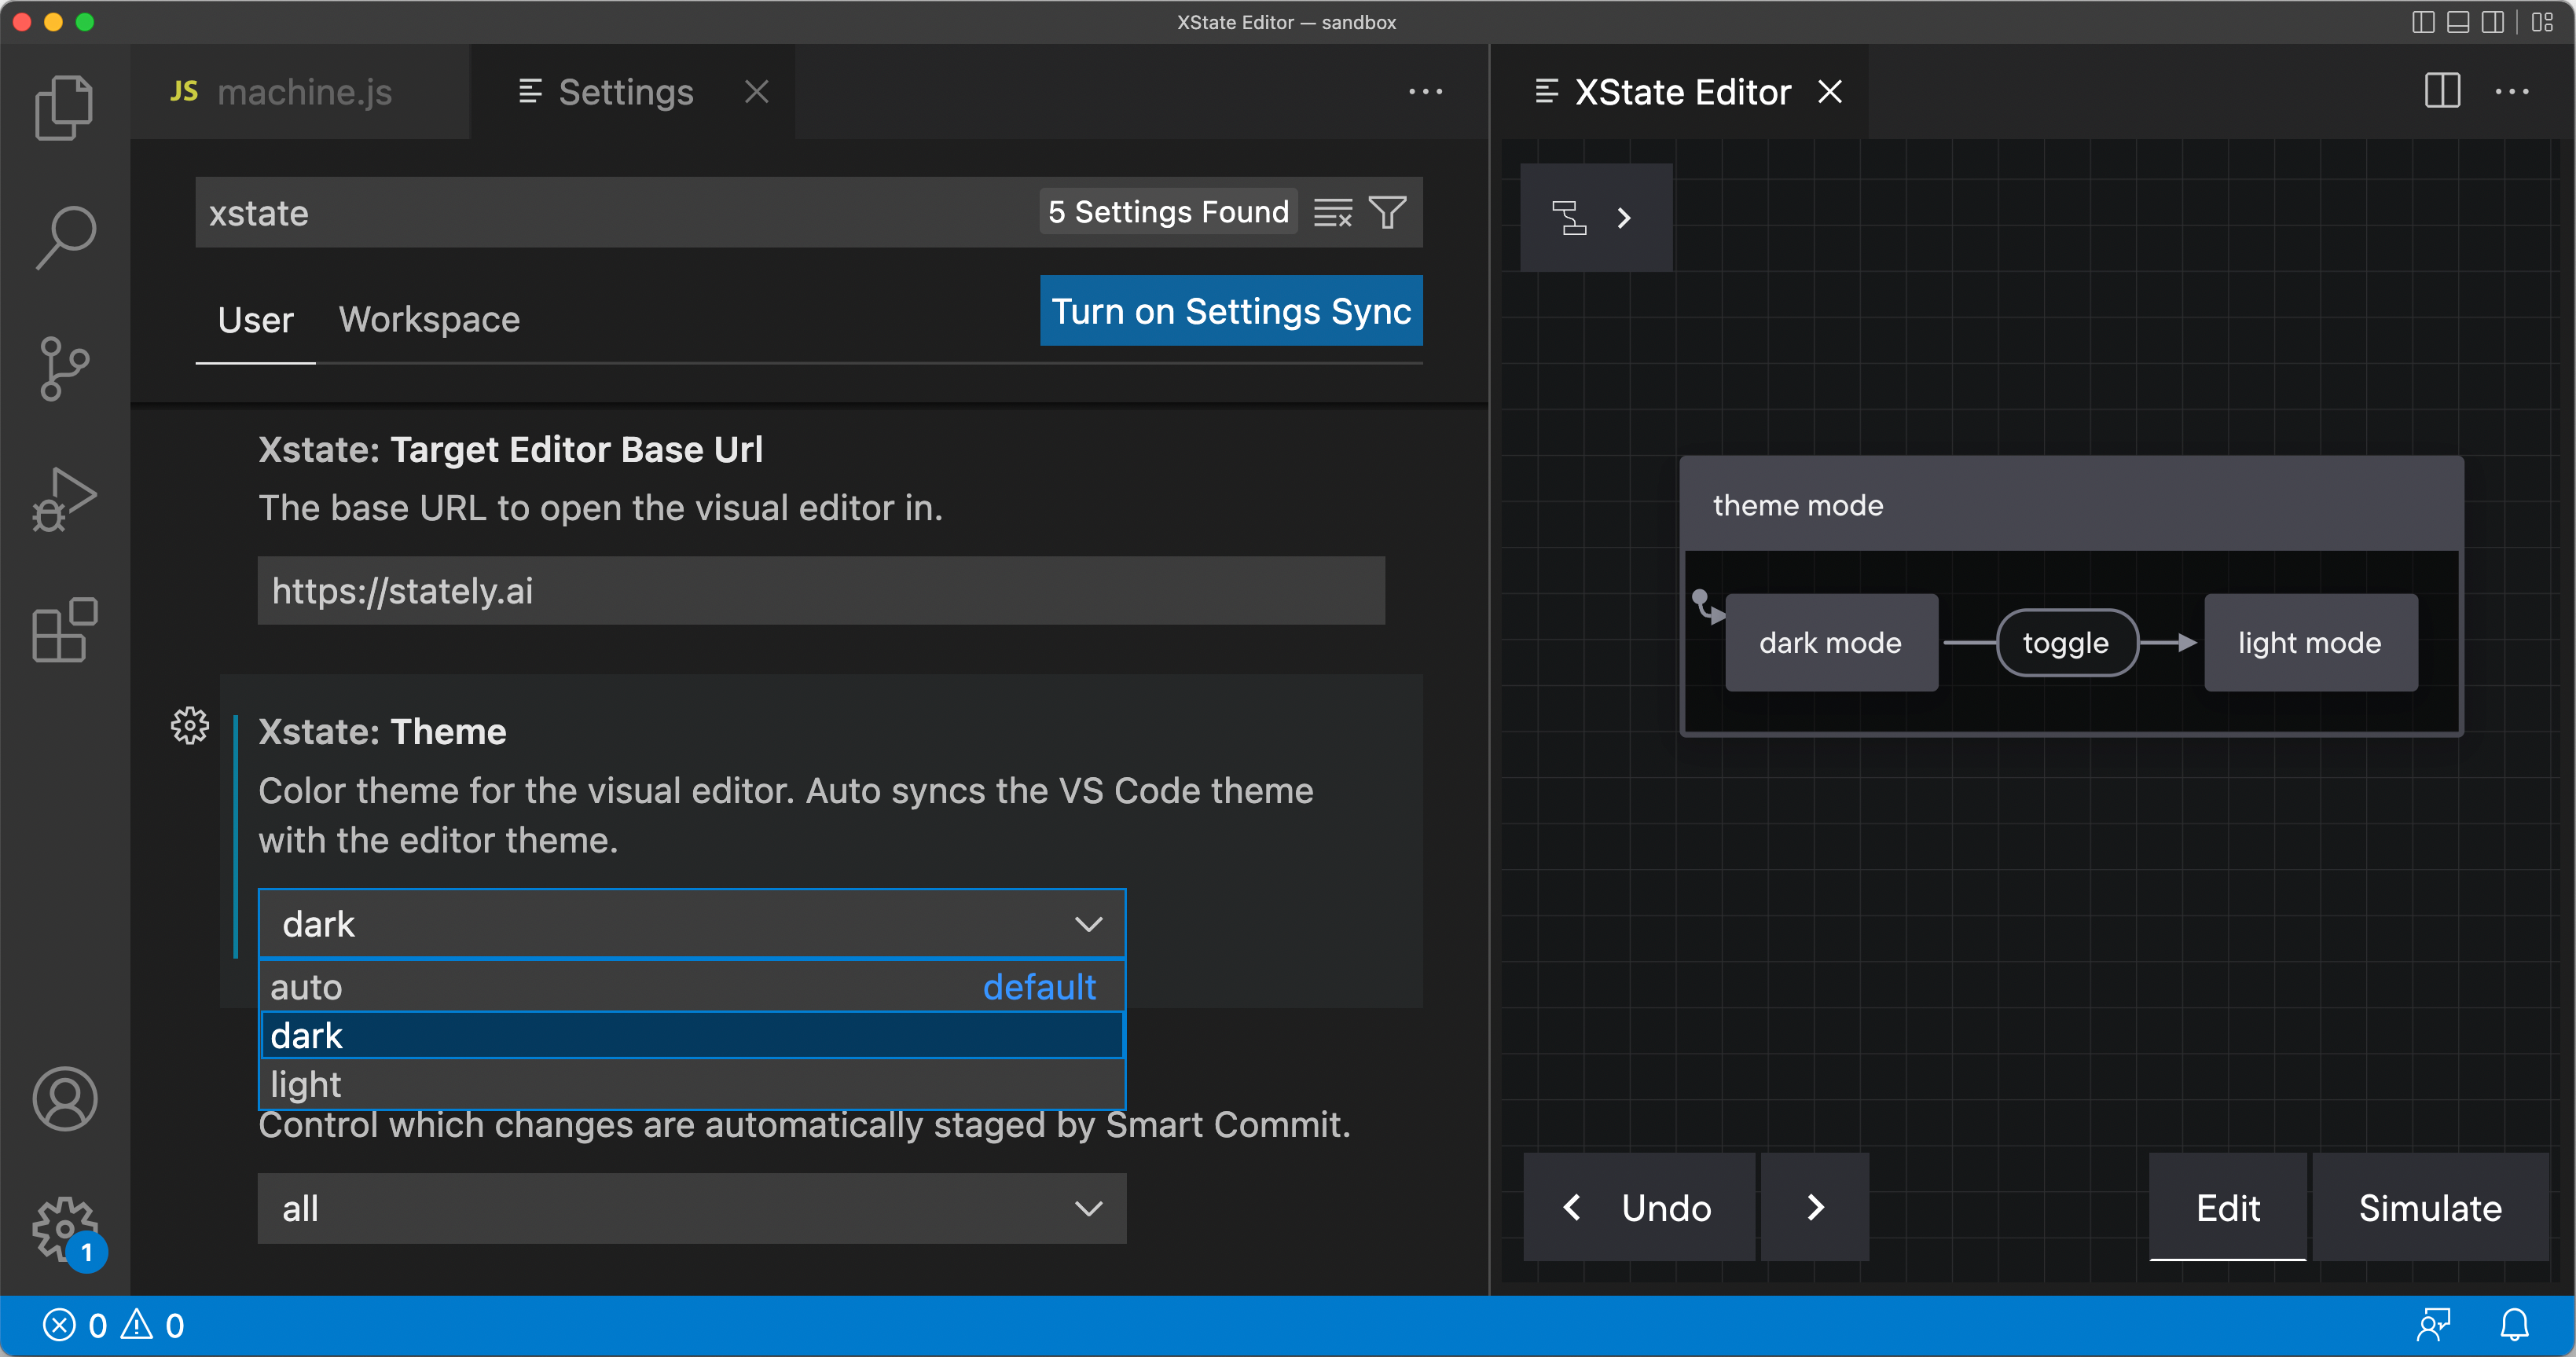 The XState: theme setting in VSCode is set to dark and the visual editor is in dark mode.